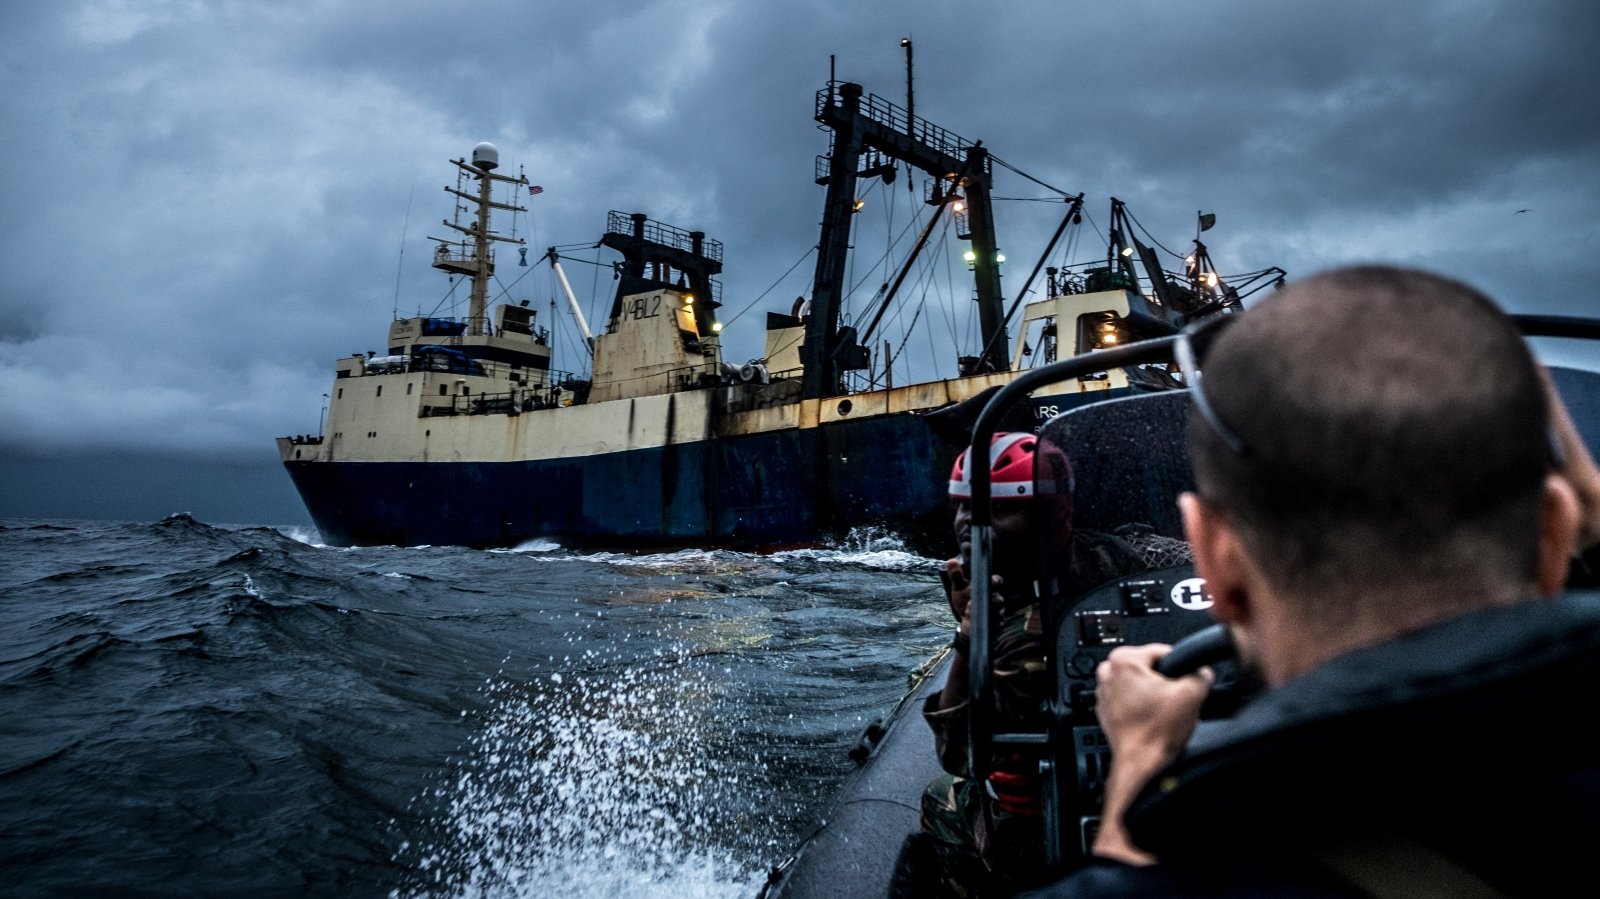 Sea Shepherd Defends Liberia’s Right to Inspect Fishing Vessels